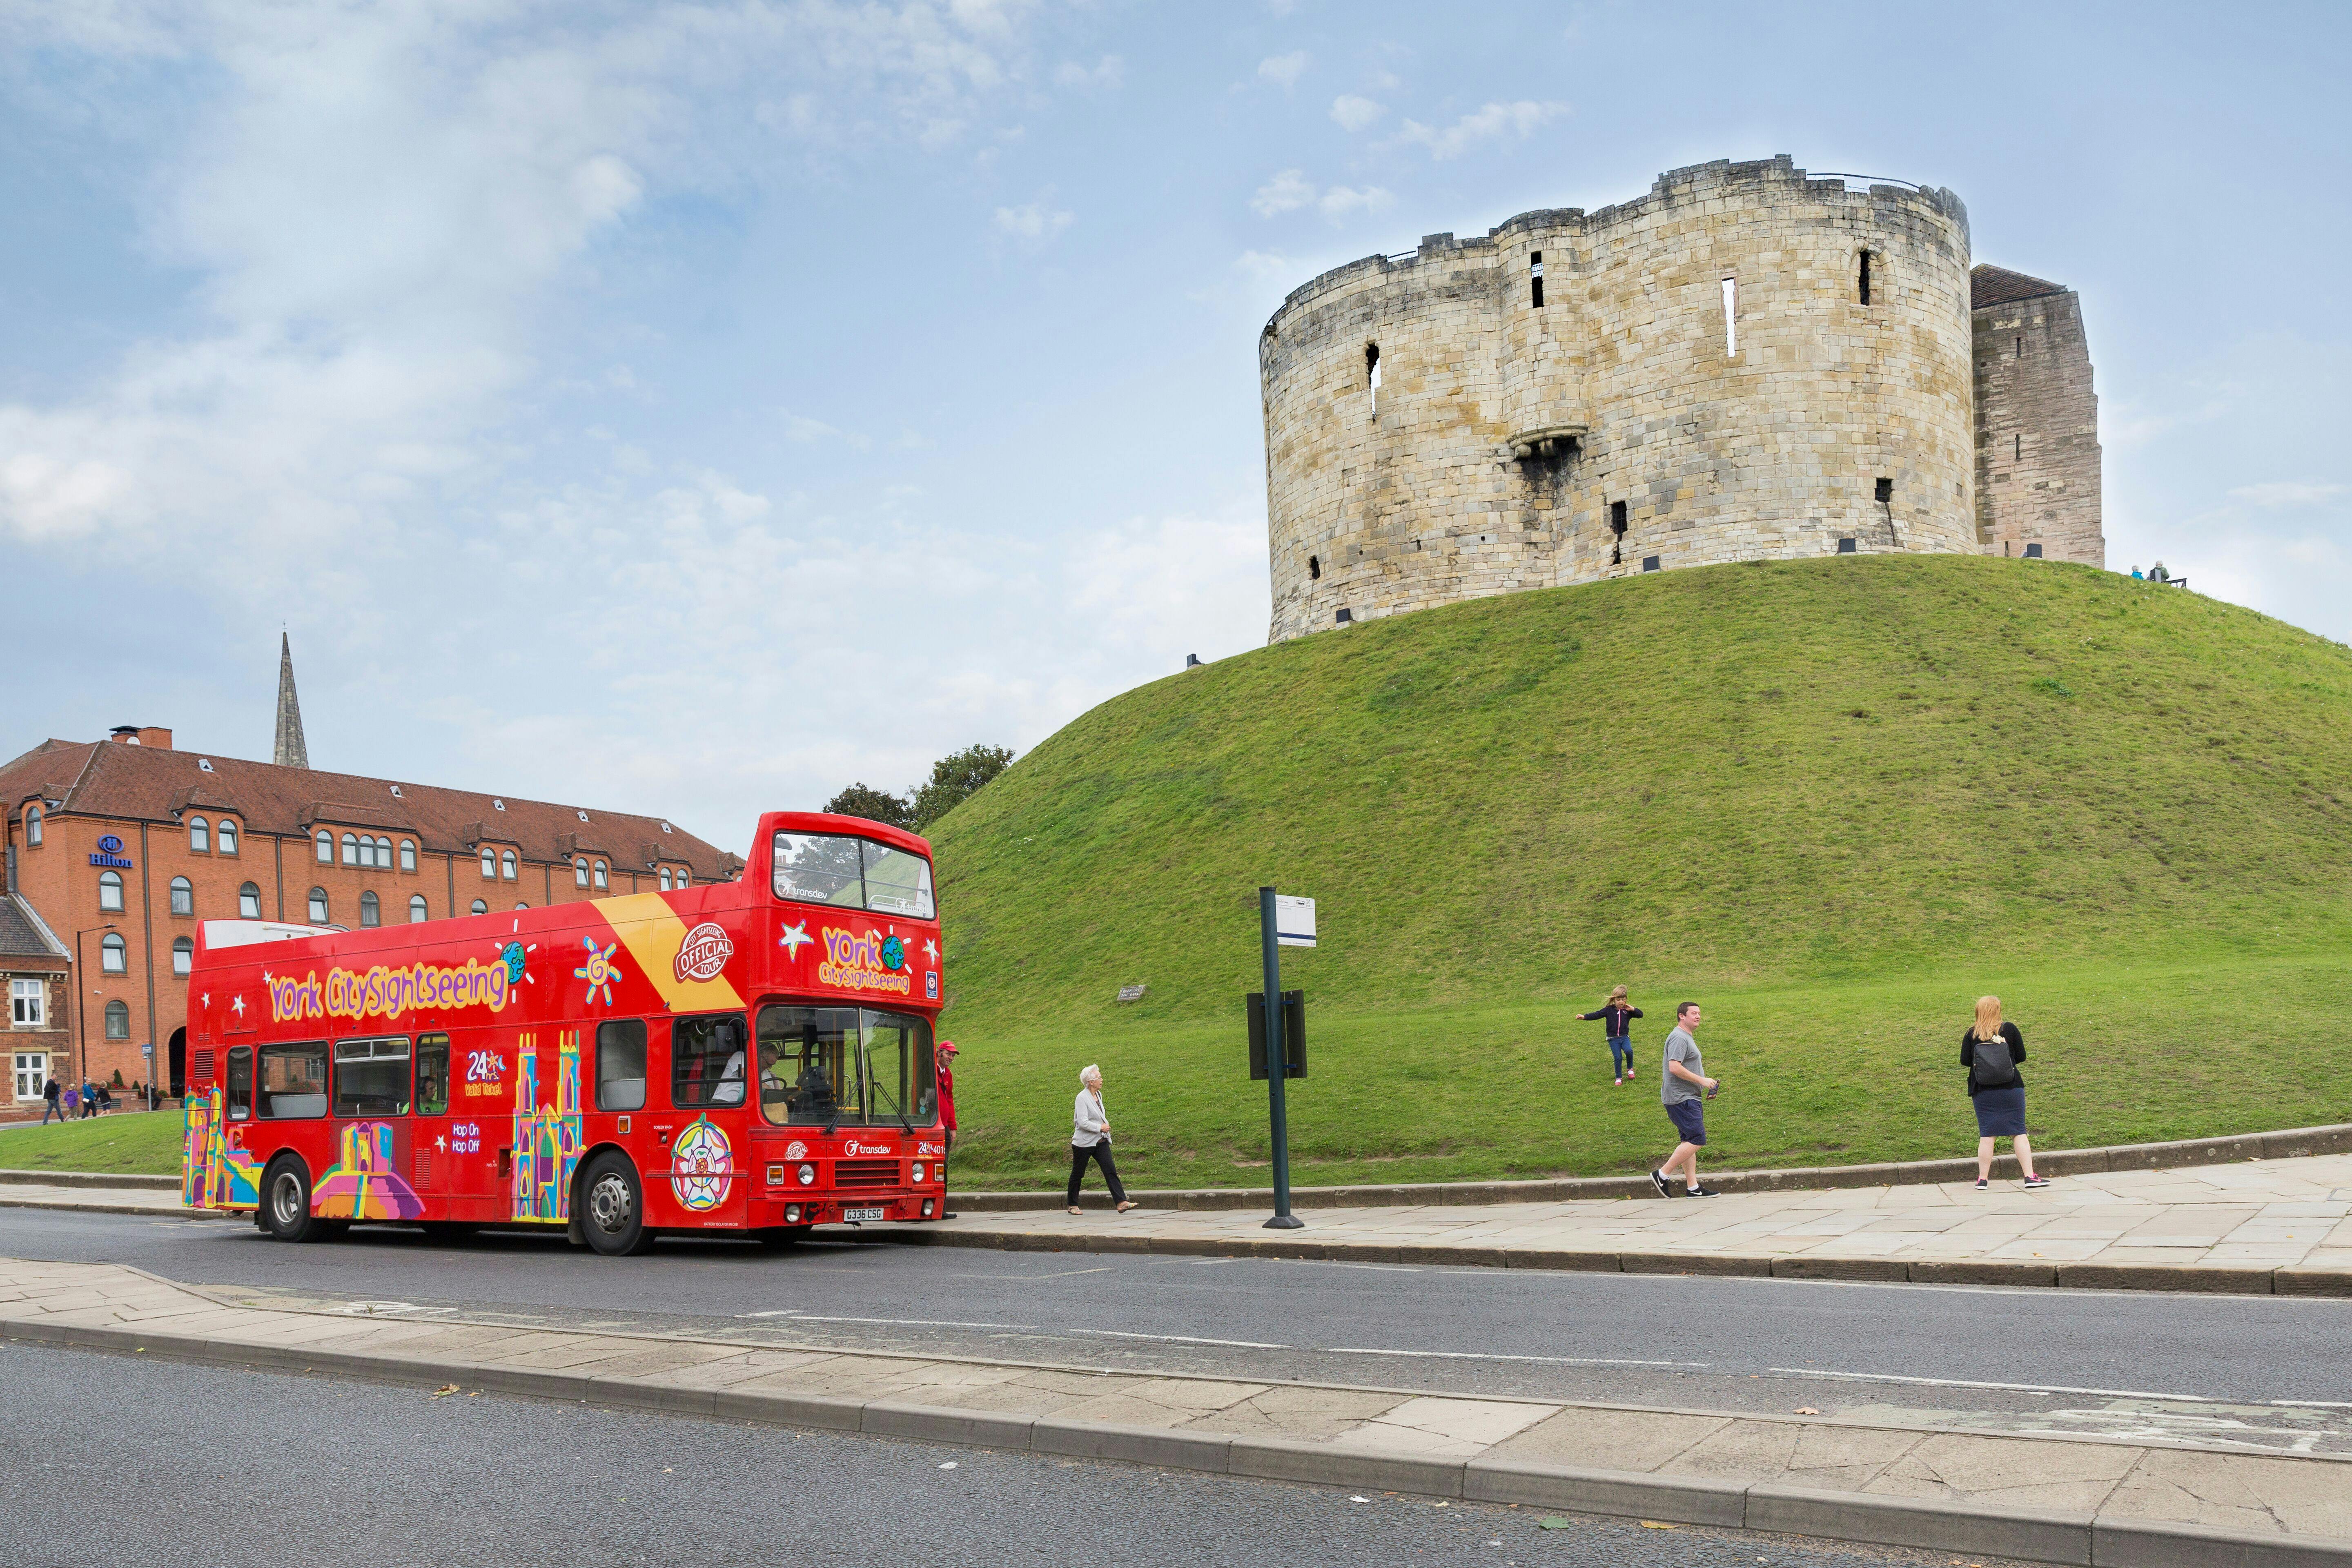 Tour di York in autobus hop-on hop-off di 24 ore con City Sightseeing